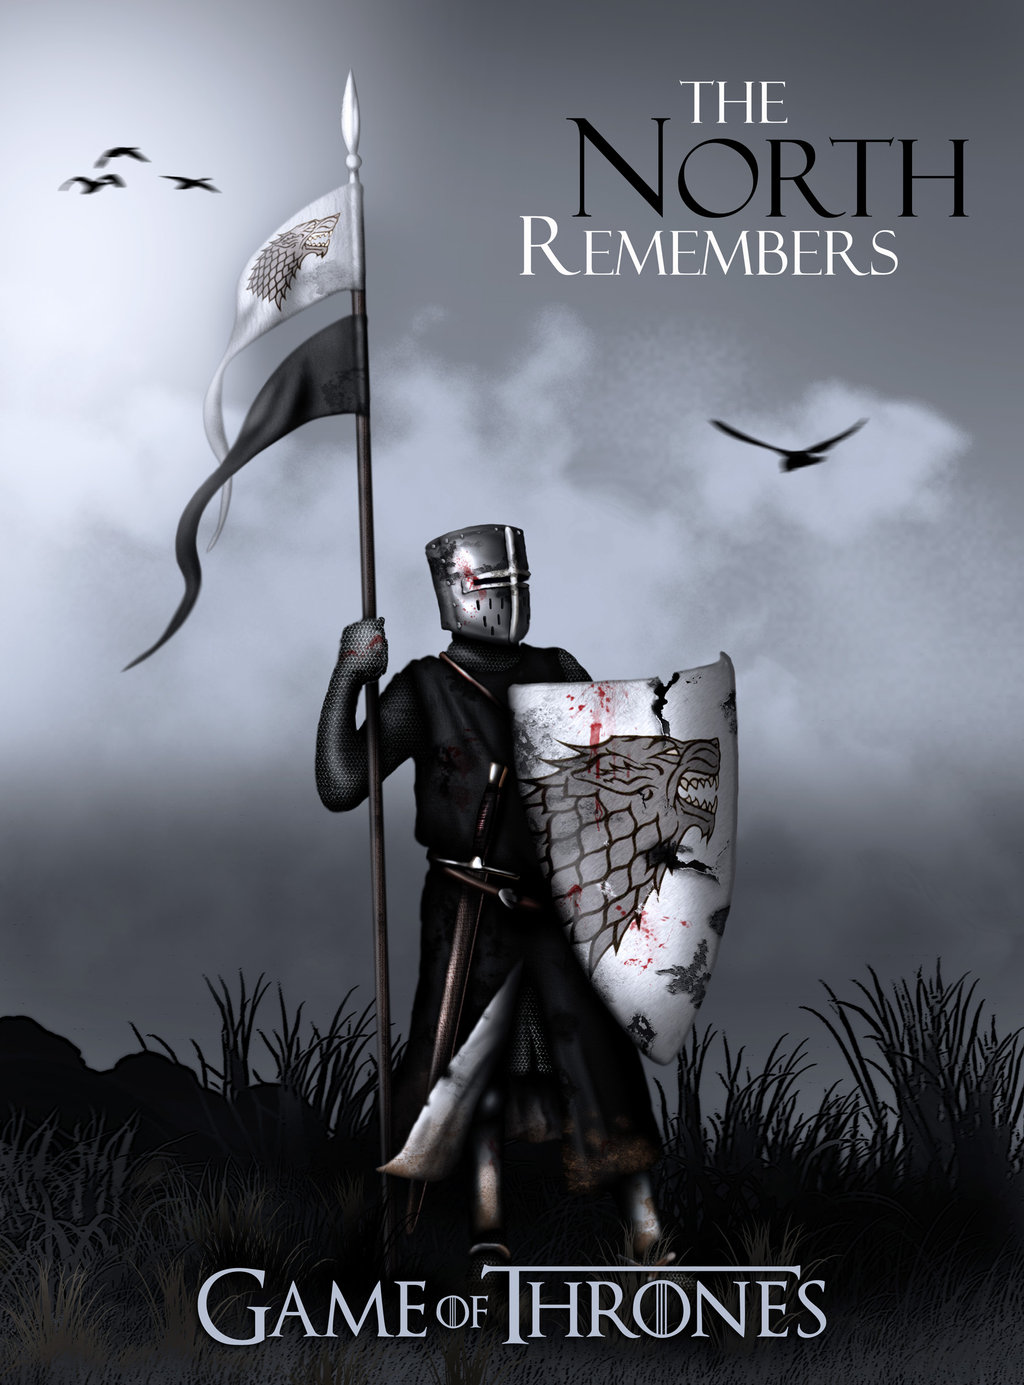 The North Remembers by dmavromatis on